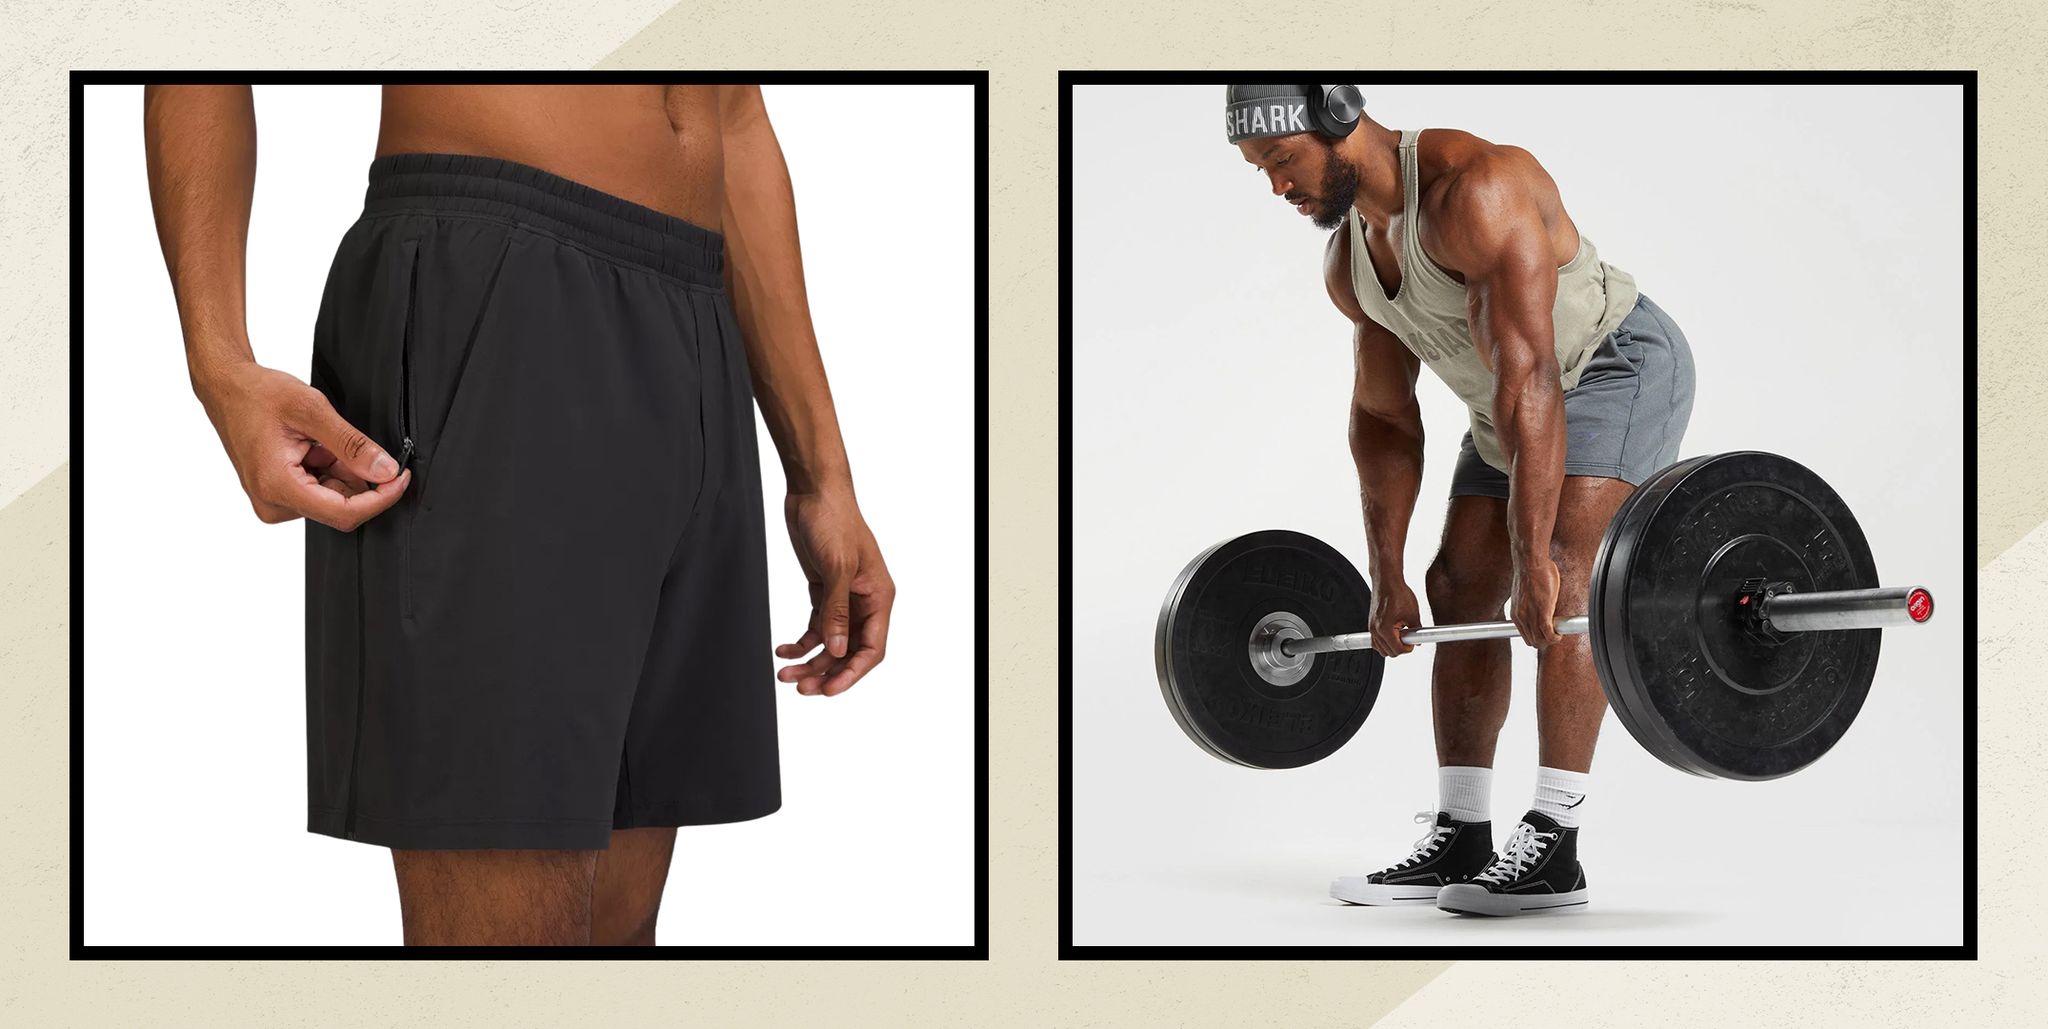 Shop for best workout clothes and gymwear for men and women at M&S